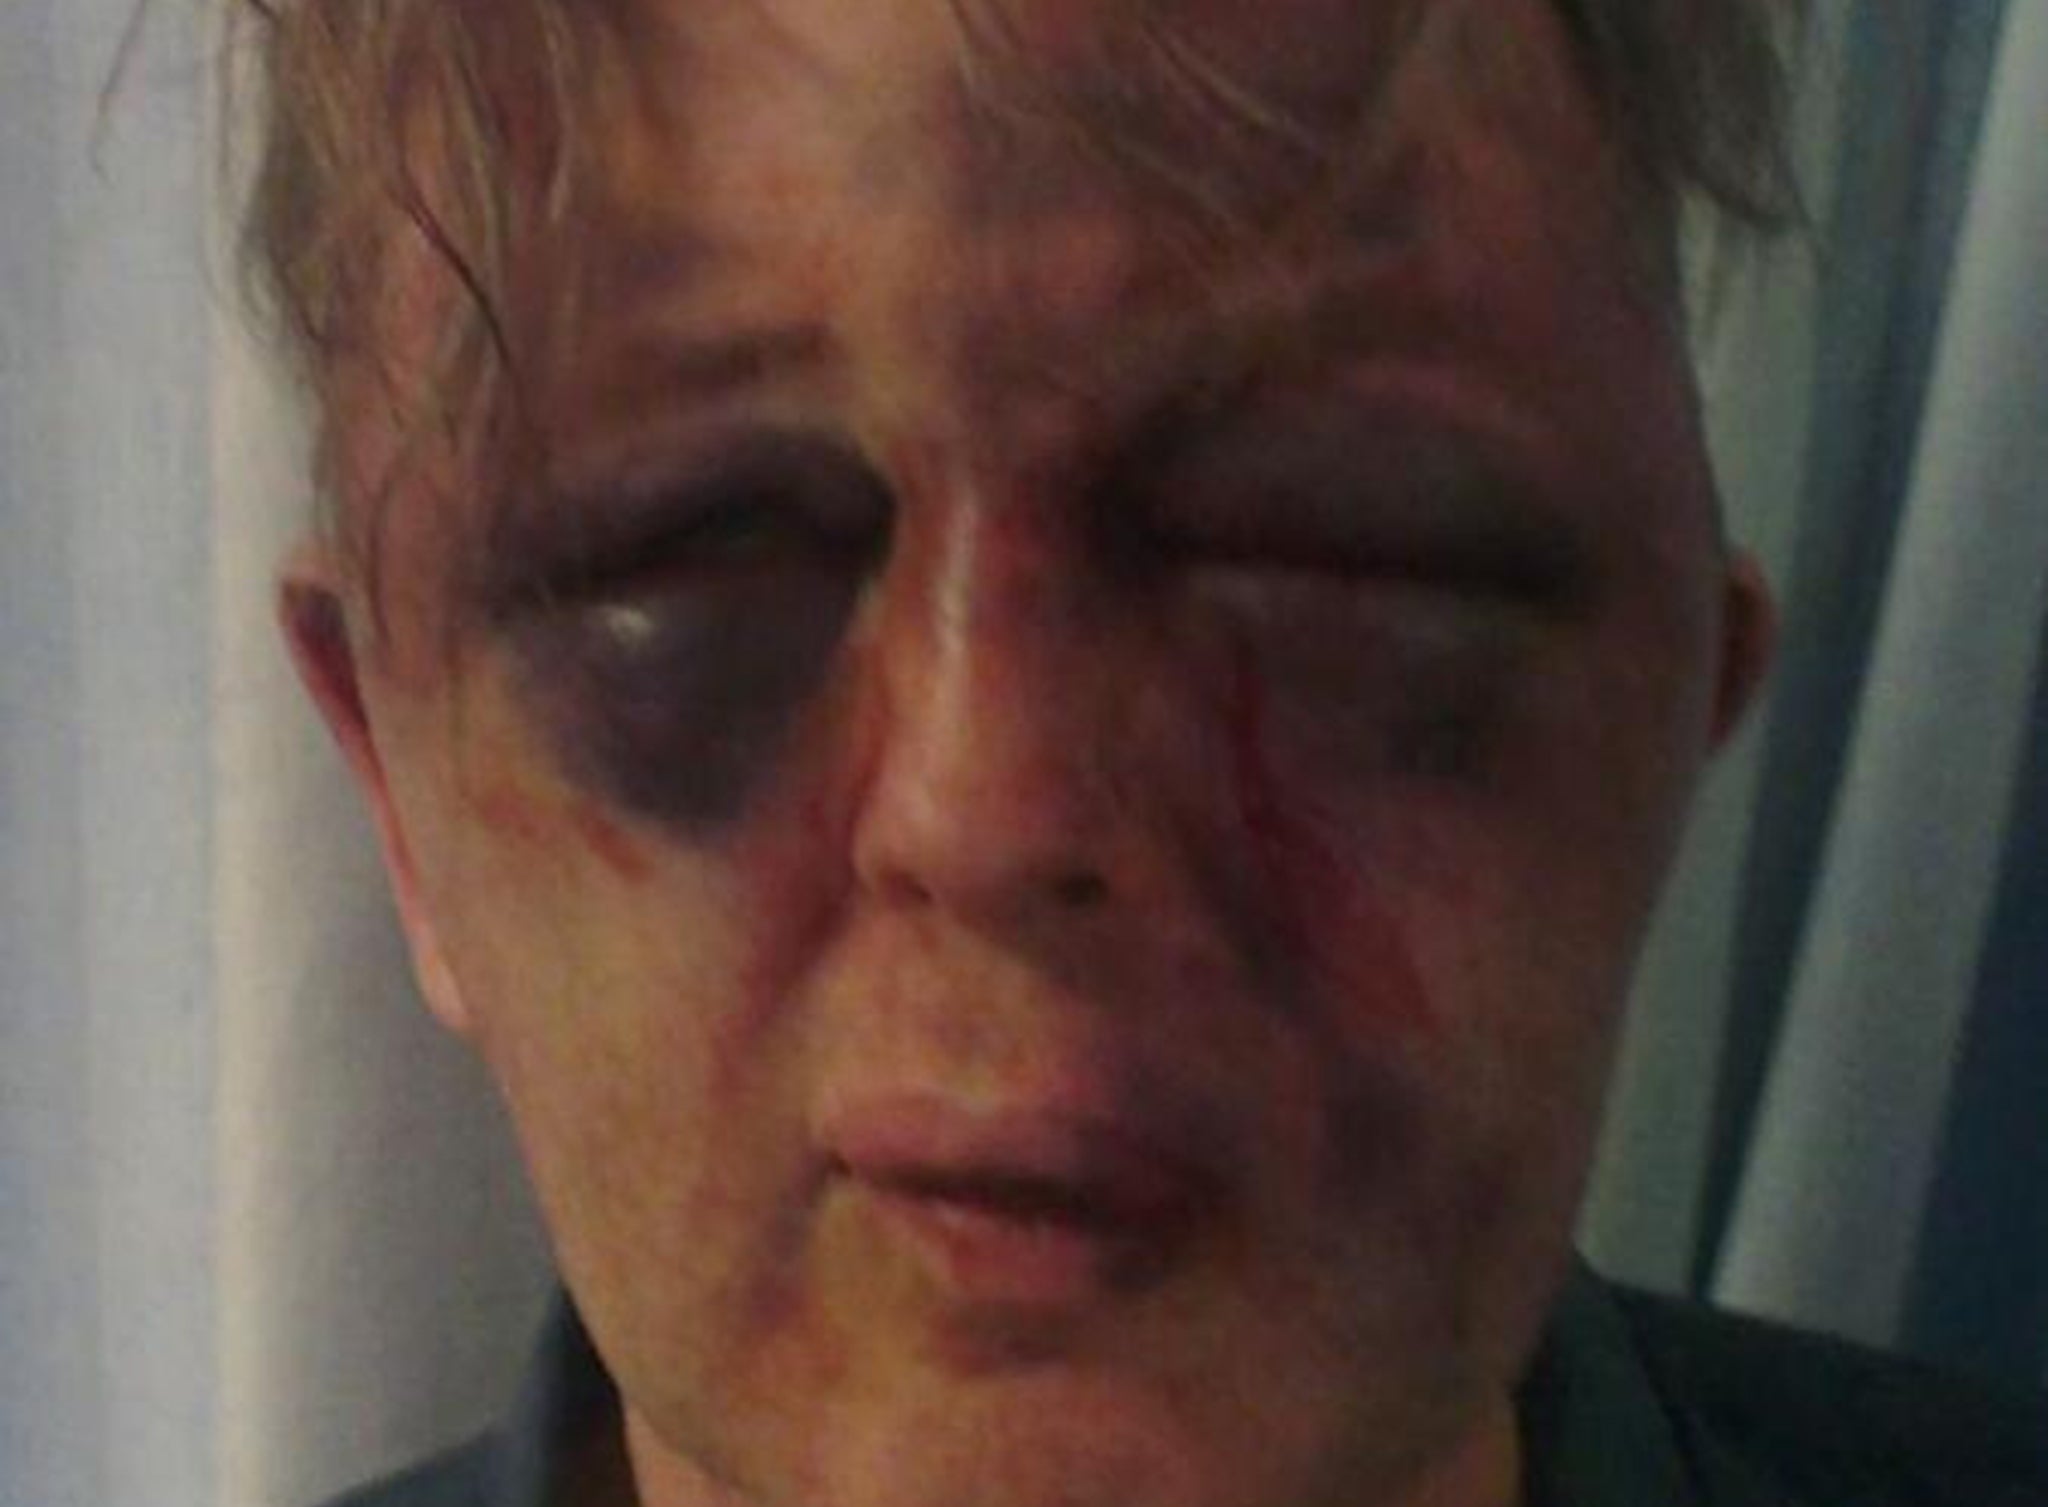 Paul Kohler, 55, sustained severe facial injuries in an aggravated burglary